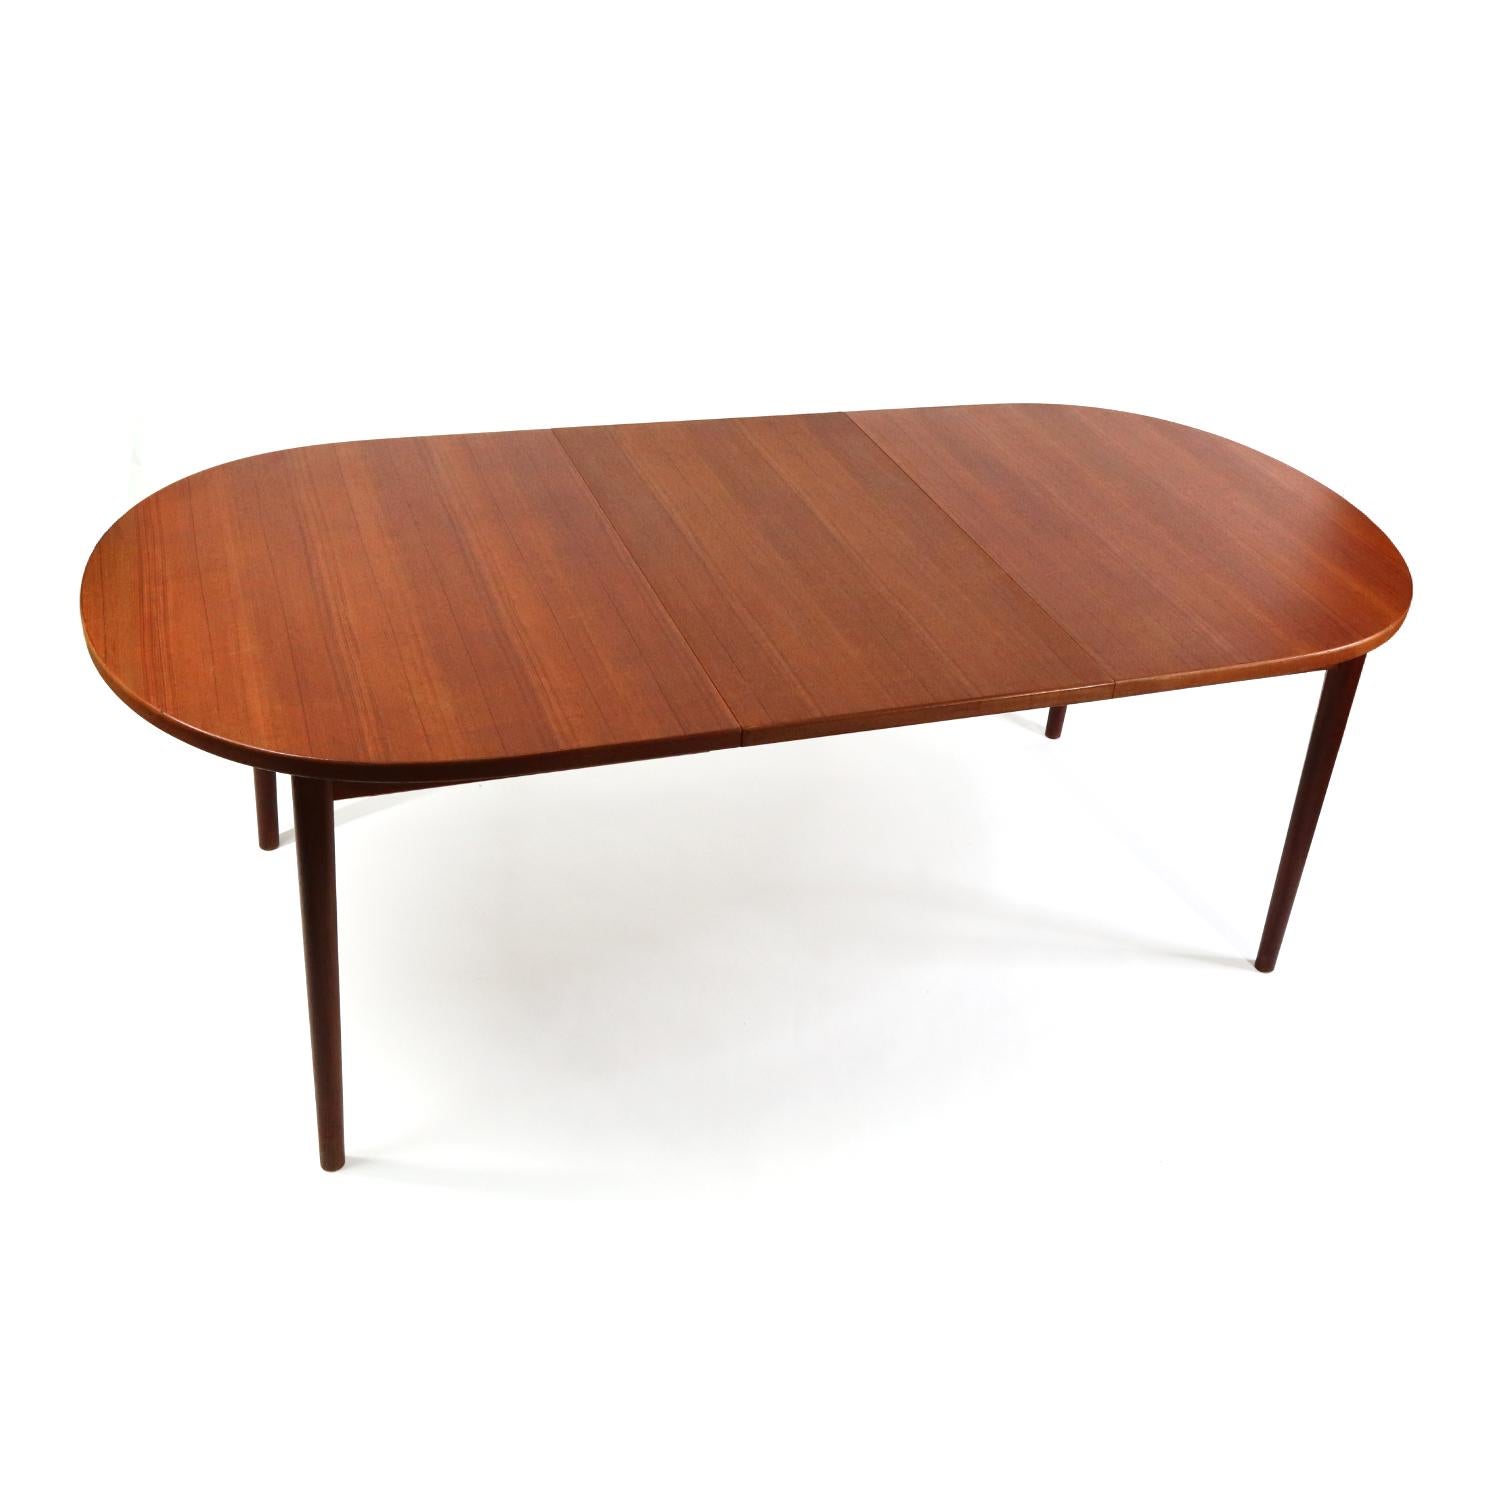 Stunning expanding Mid-Century Modern teak dining table by Nils Jonsson for Troeds. The Swedish made dining table comes with two large leaves. The table is stands at 61? long when compact. Even at compact size, you can seat six. Each leaf is 21.5?